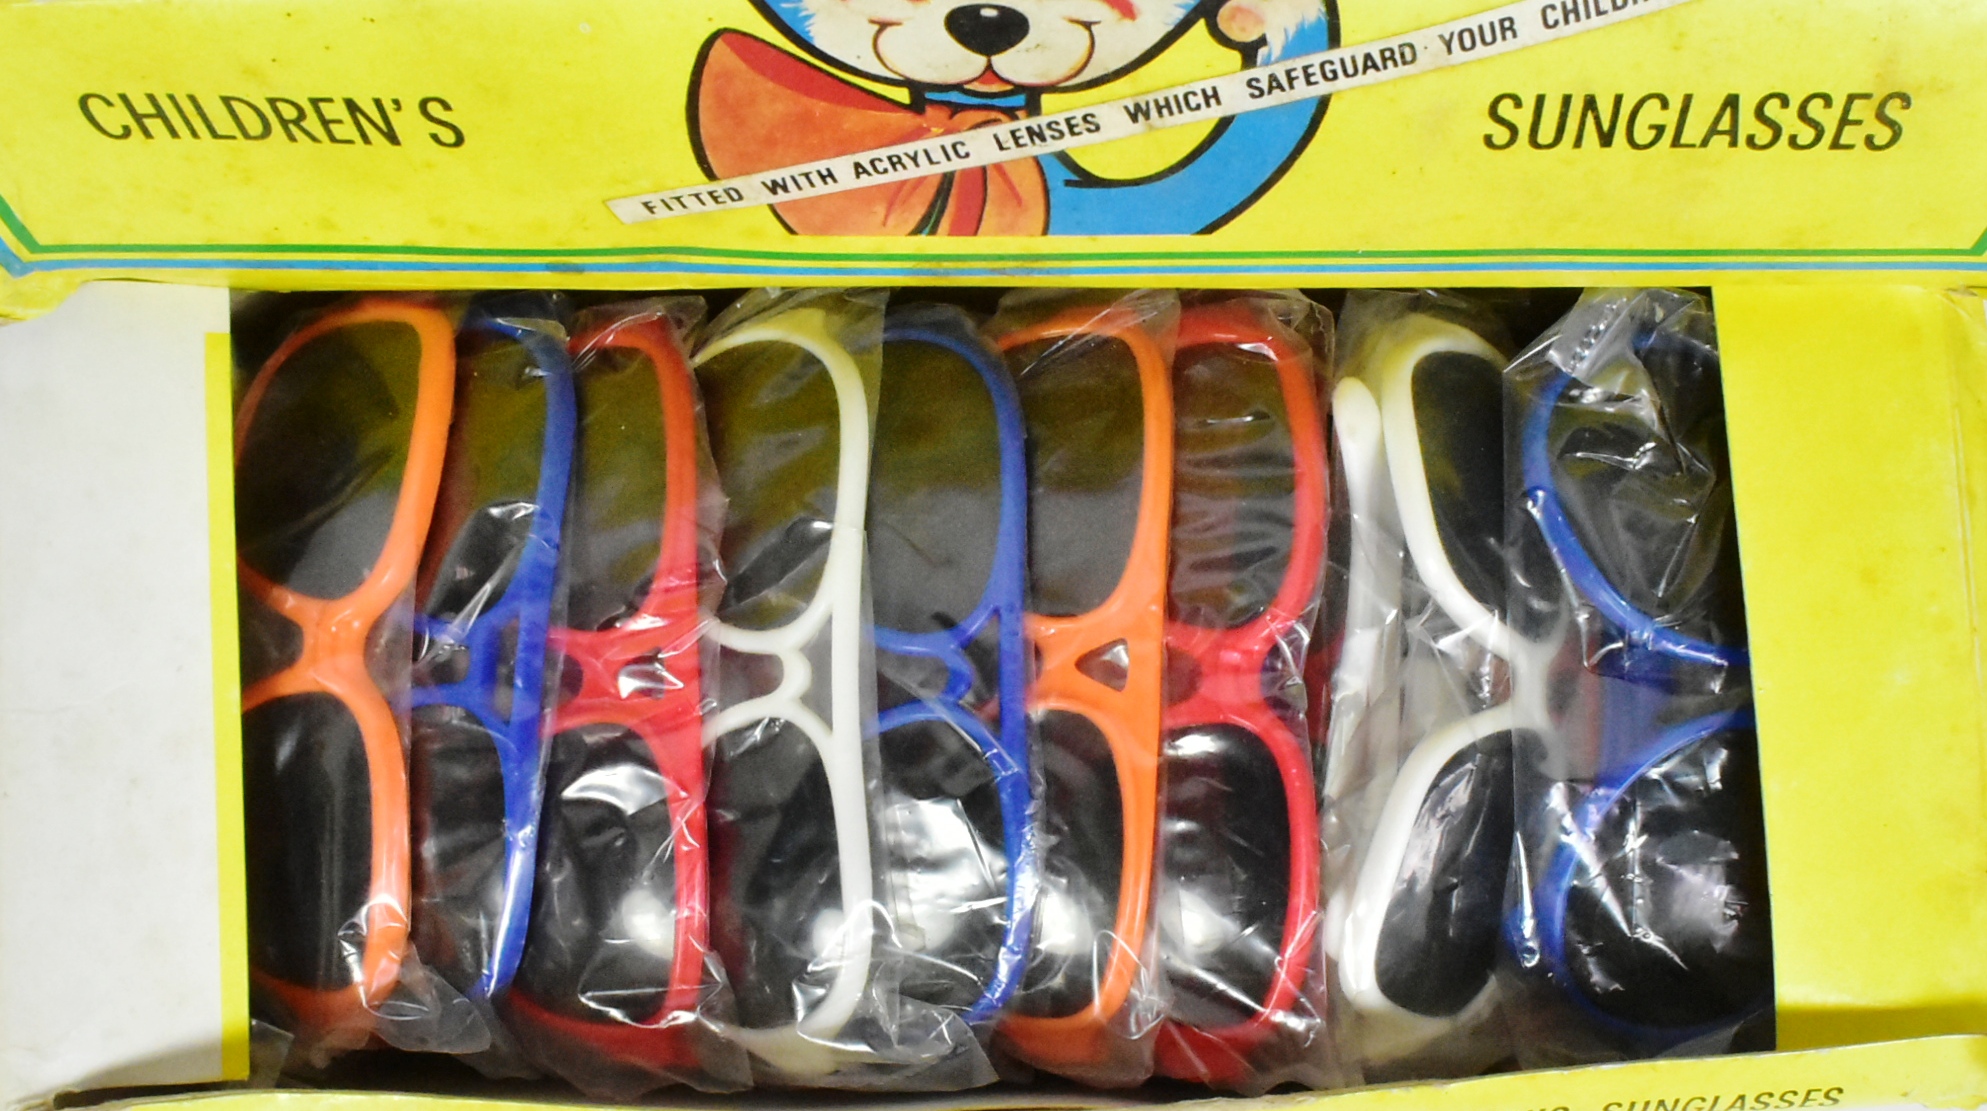 COUNTER TOP DISPLAY BOX - VINTAGE 'CHILDREN'S SUNGLASSES' - Image 2 of 5